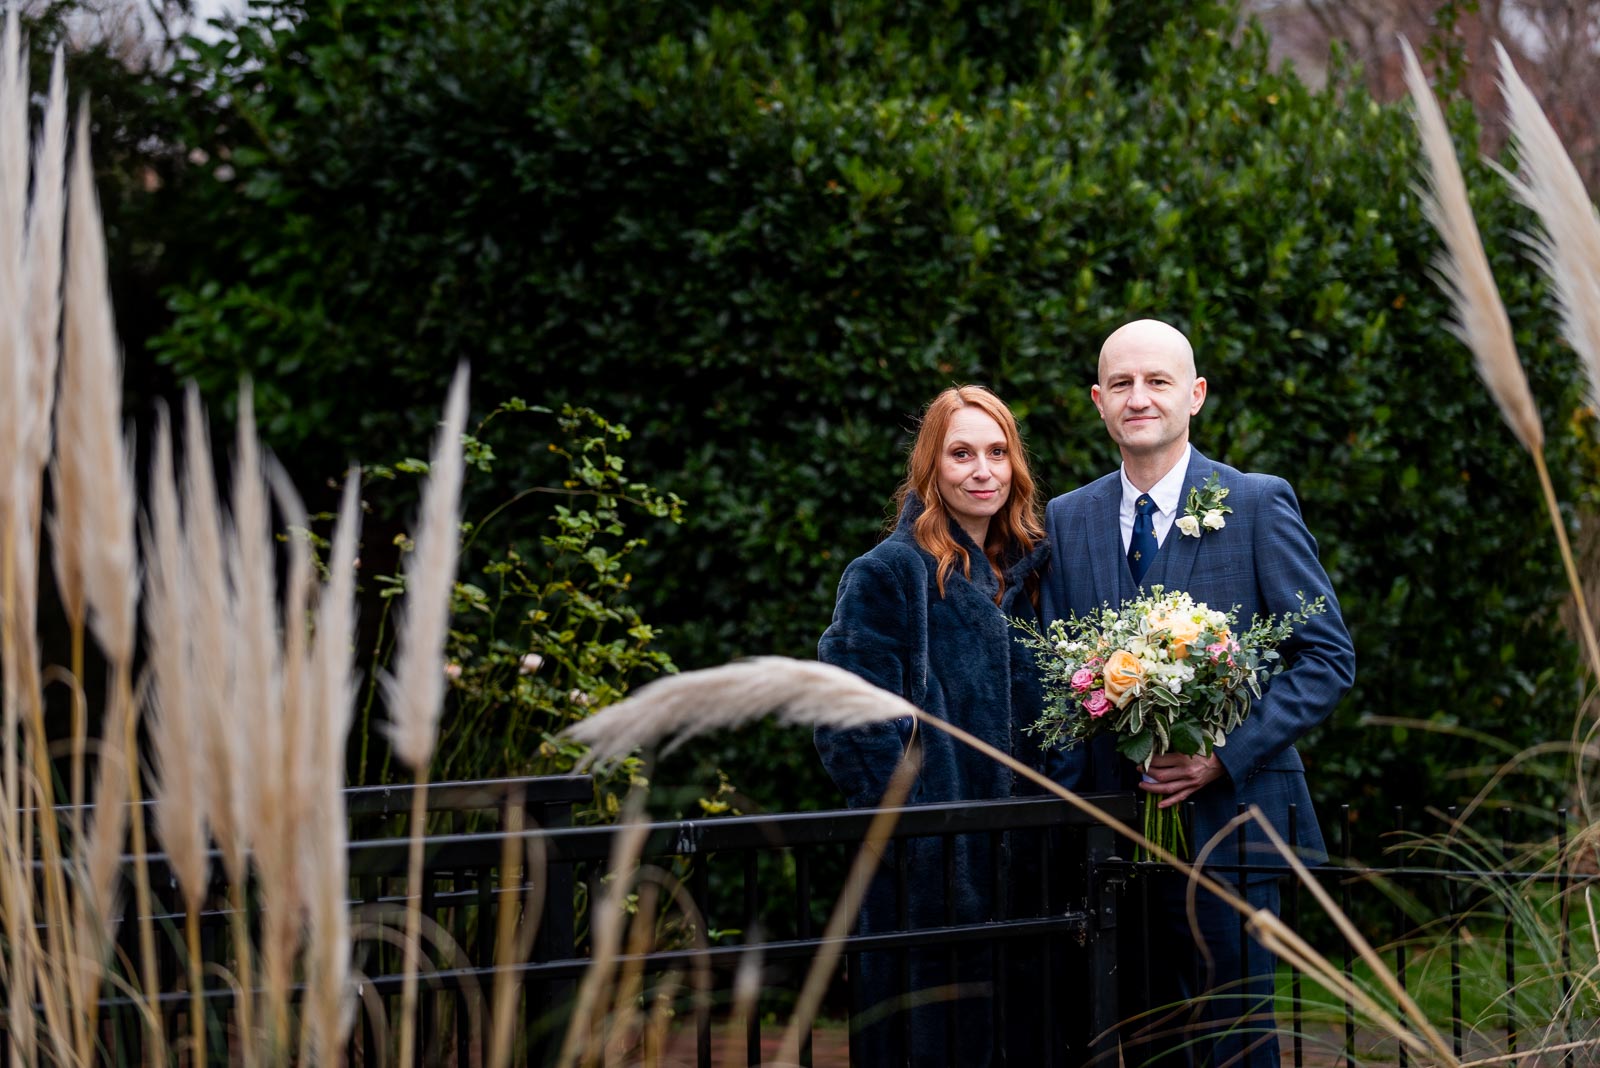 Wedding Photographer for Melanie and Ryan at Lewes Registry Office